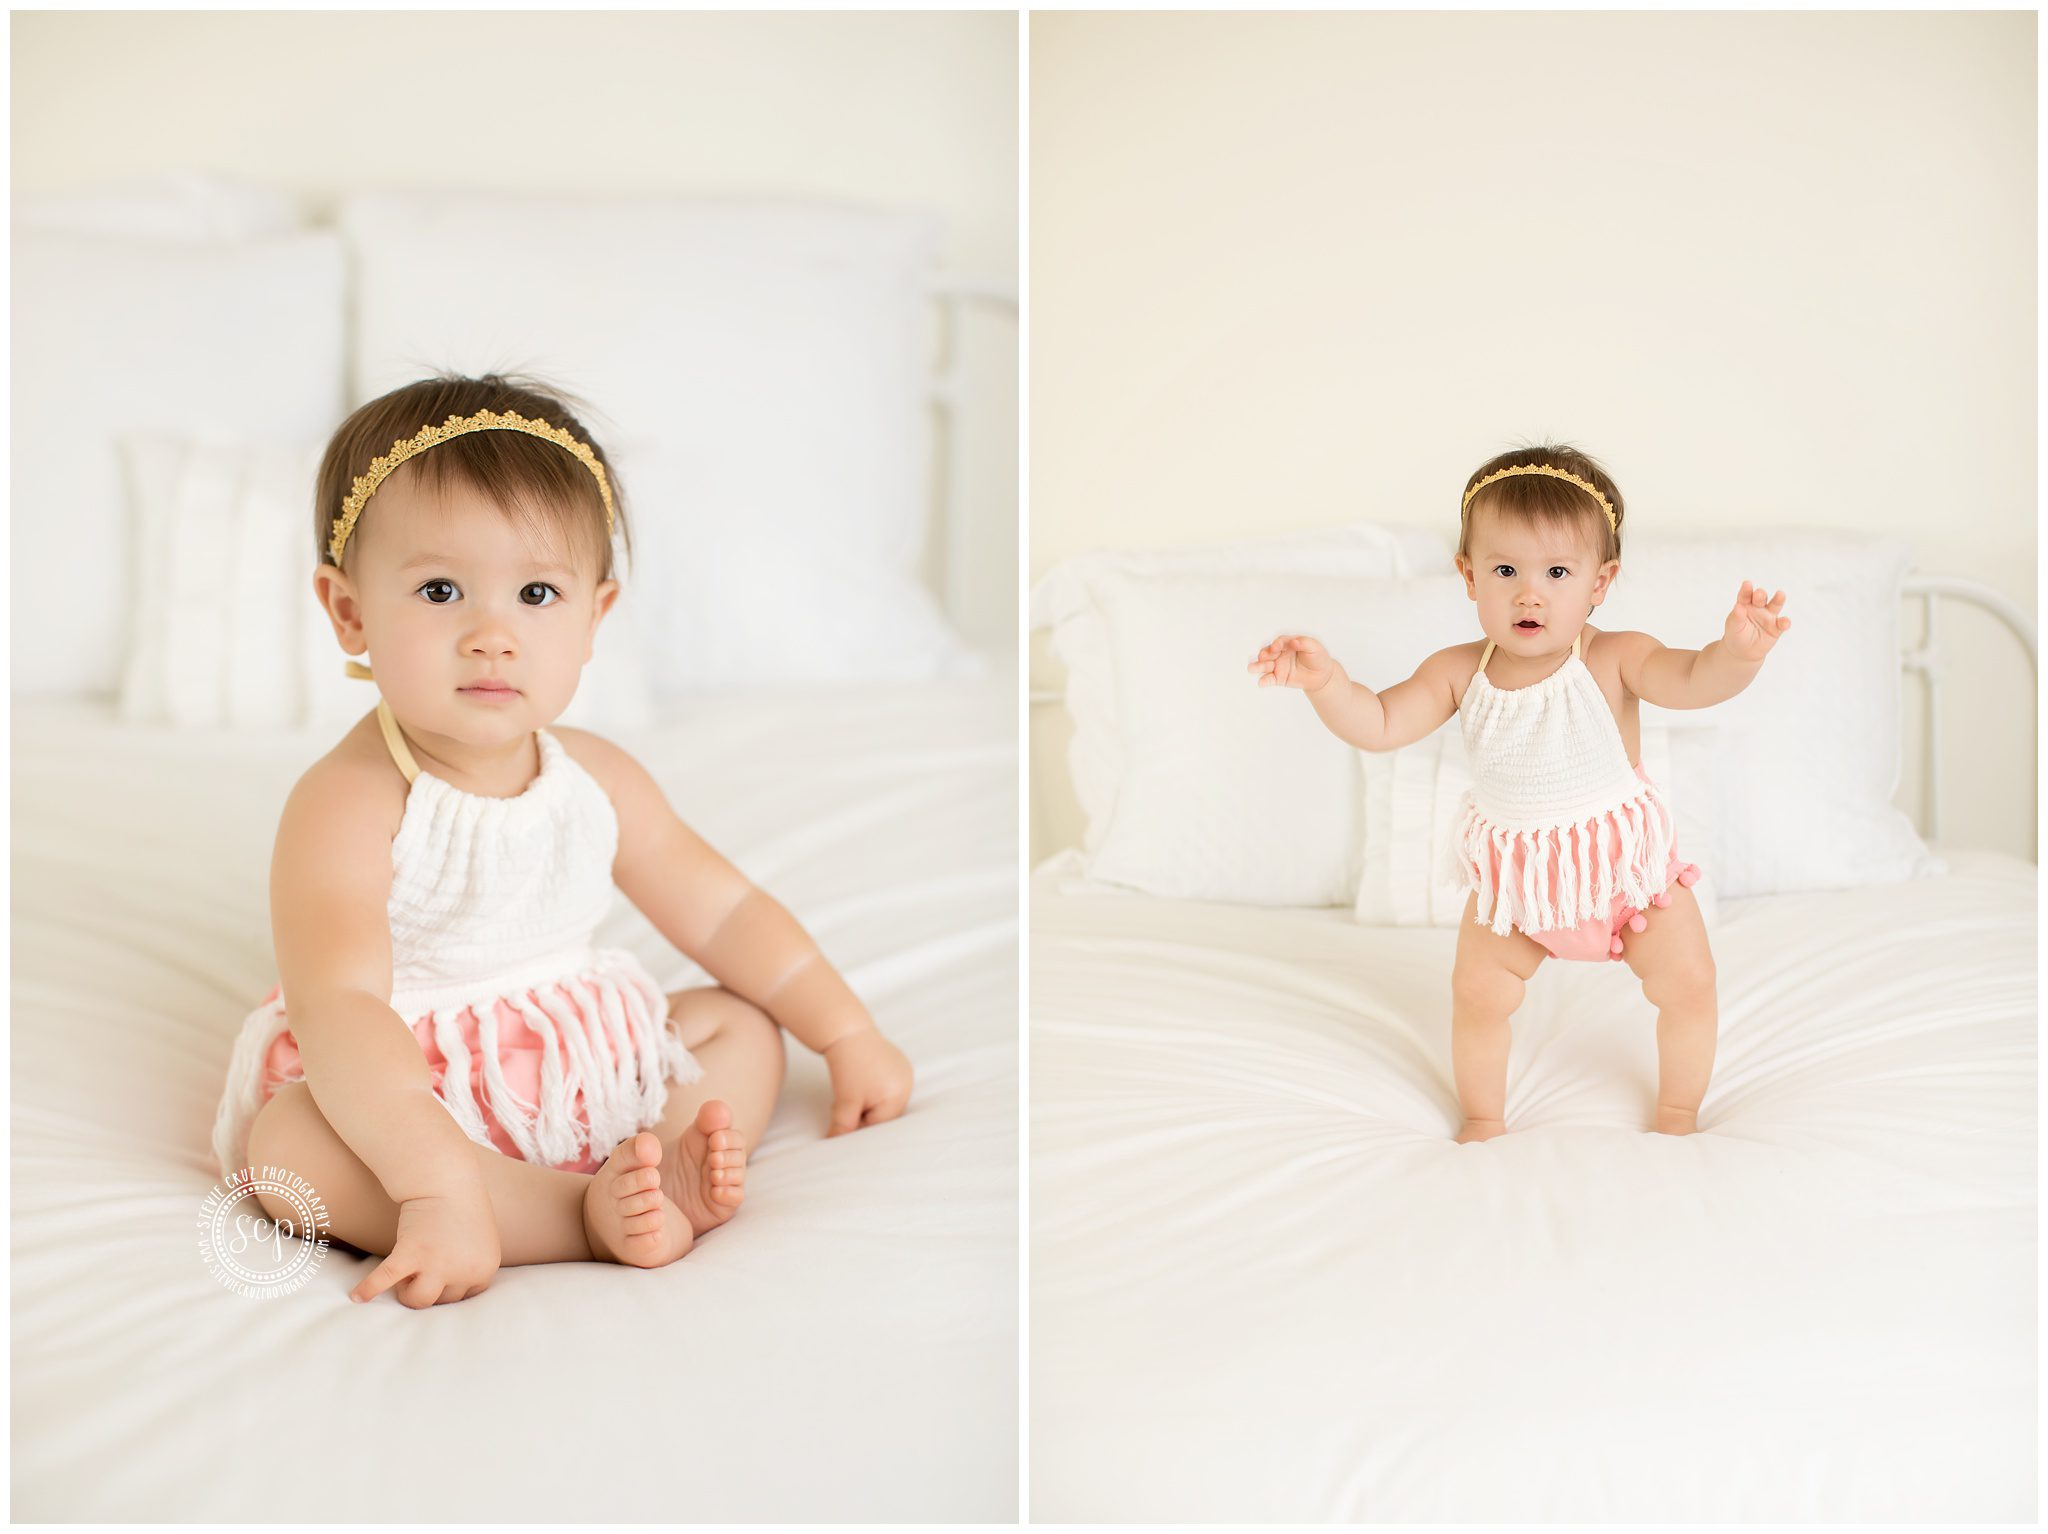 What a cute outfit idea for a baby girl who is turning one. Cake smash ideas and inspiration